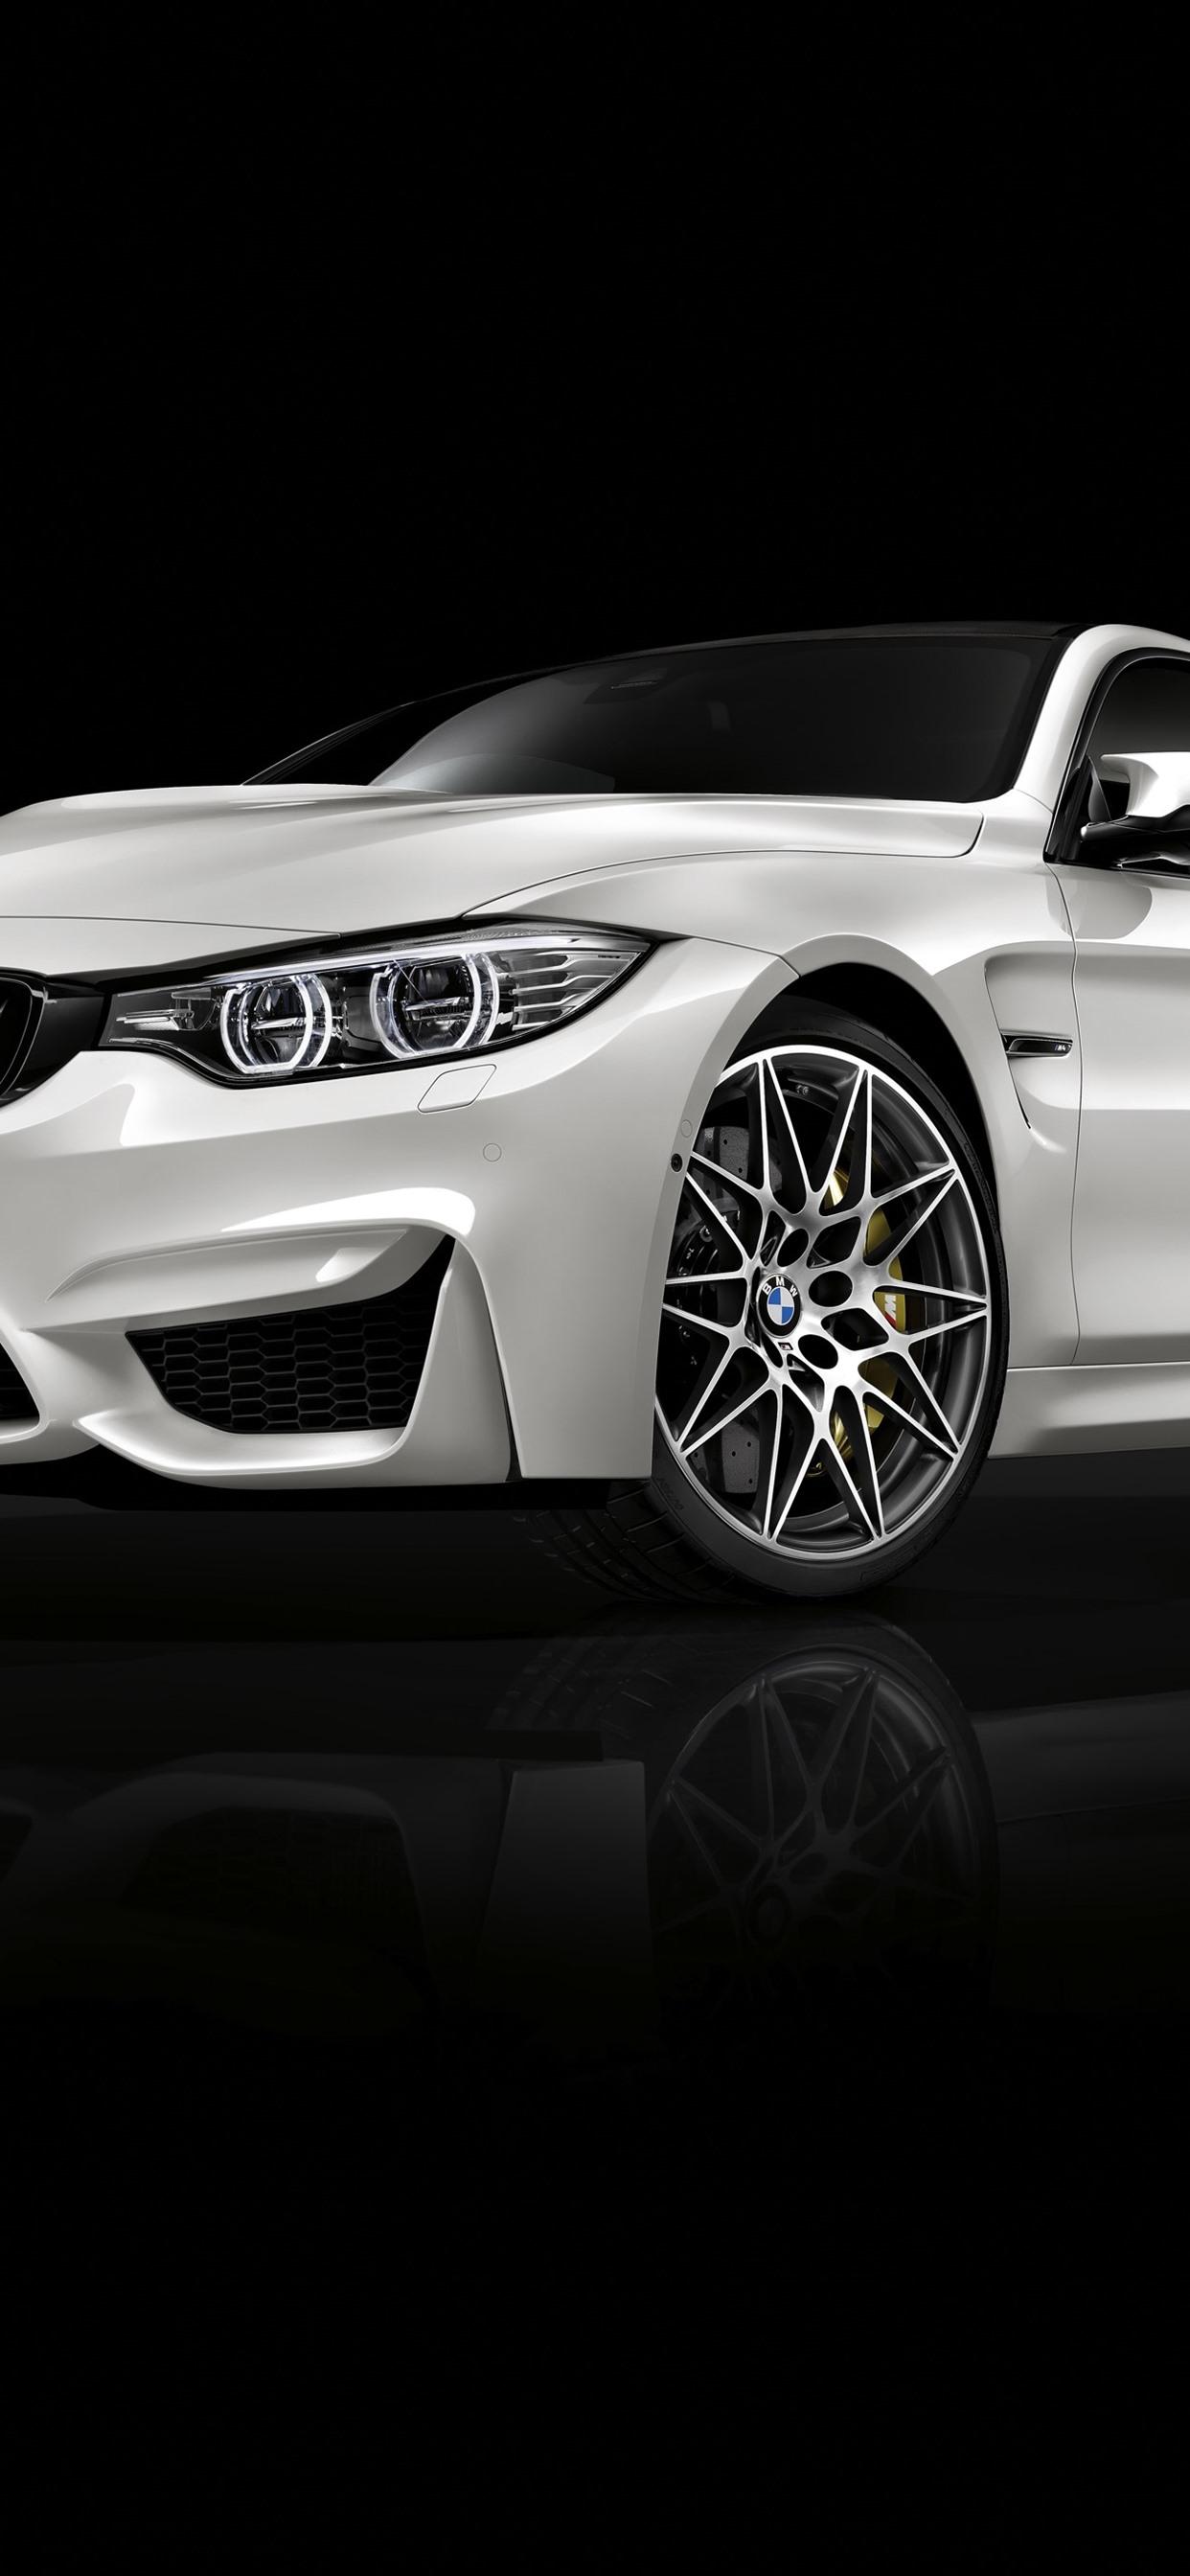 BMW M4 white car front view, black background 1242x2688 iPhone 11